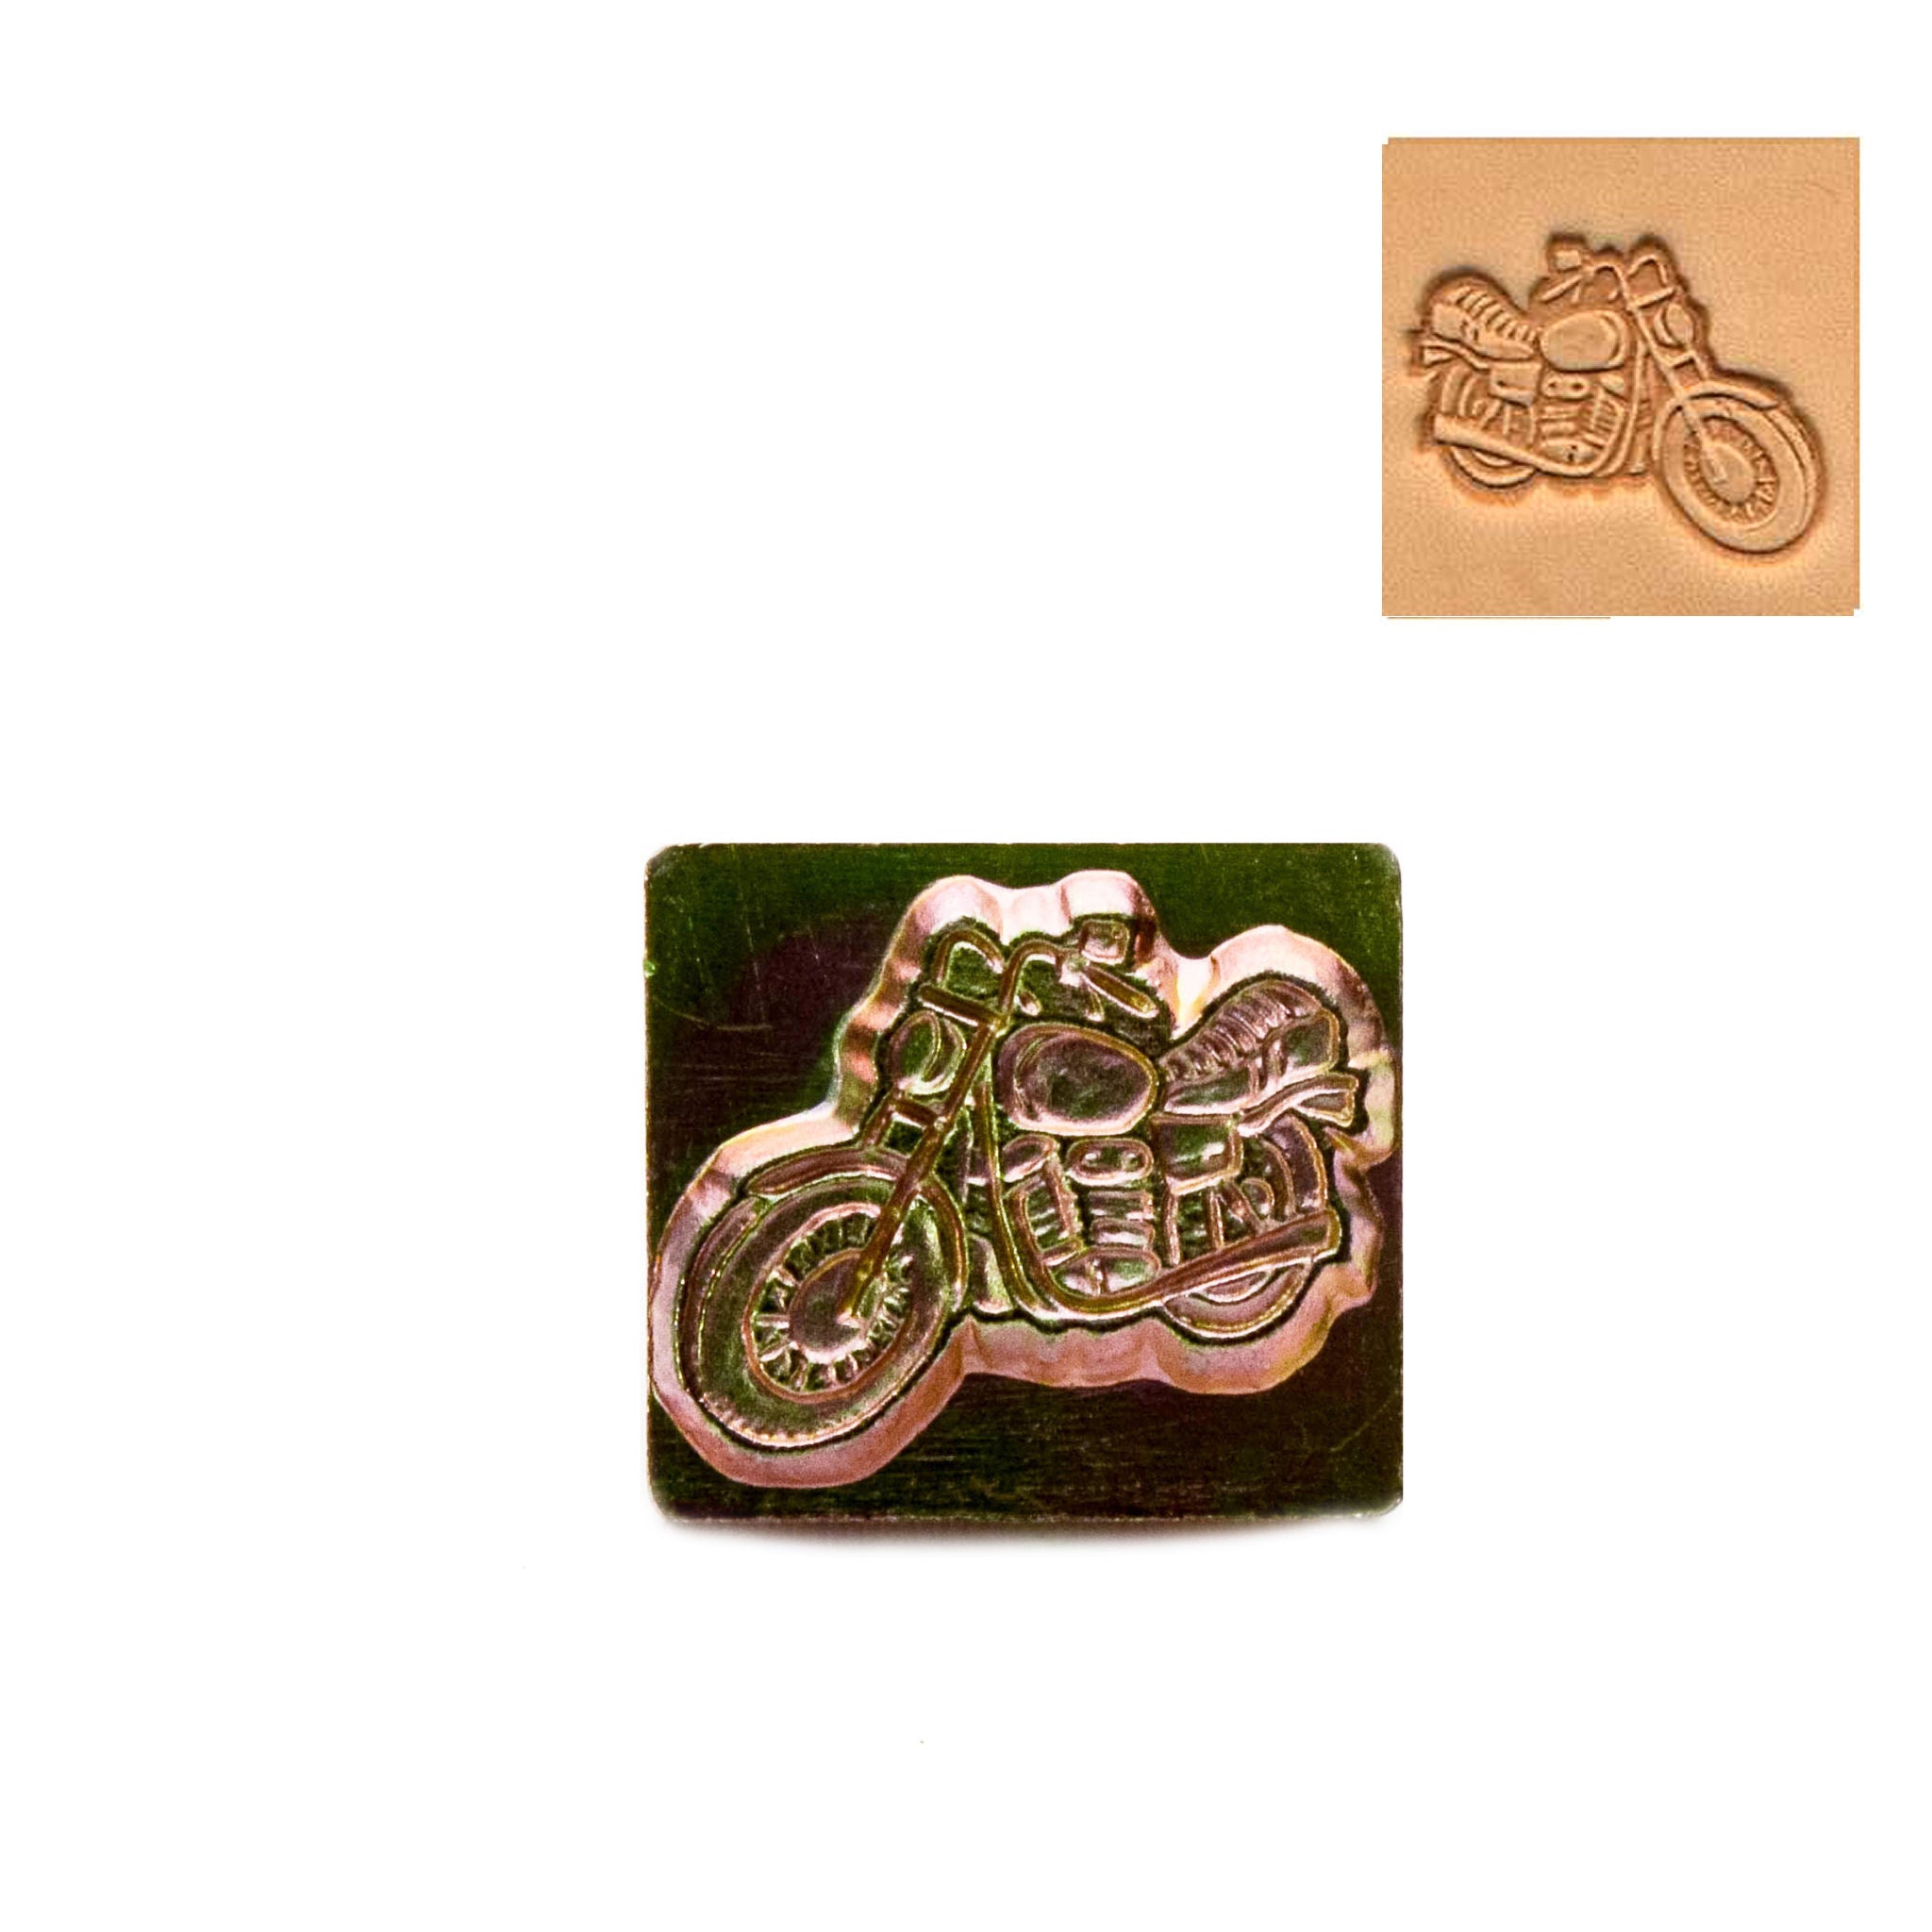 Motorbike 3d Embossing Stamp from Identity Leathercraft